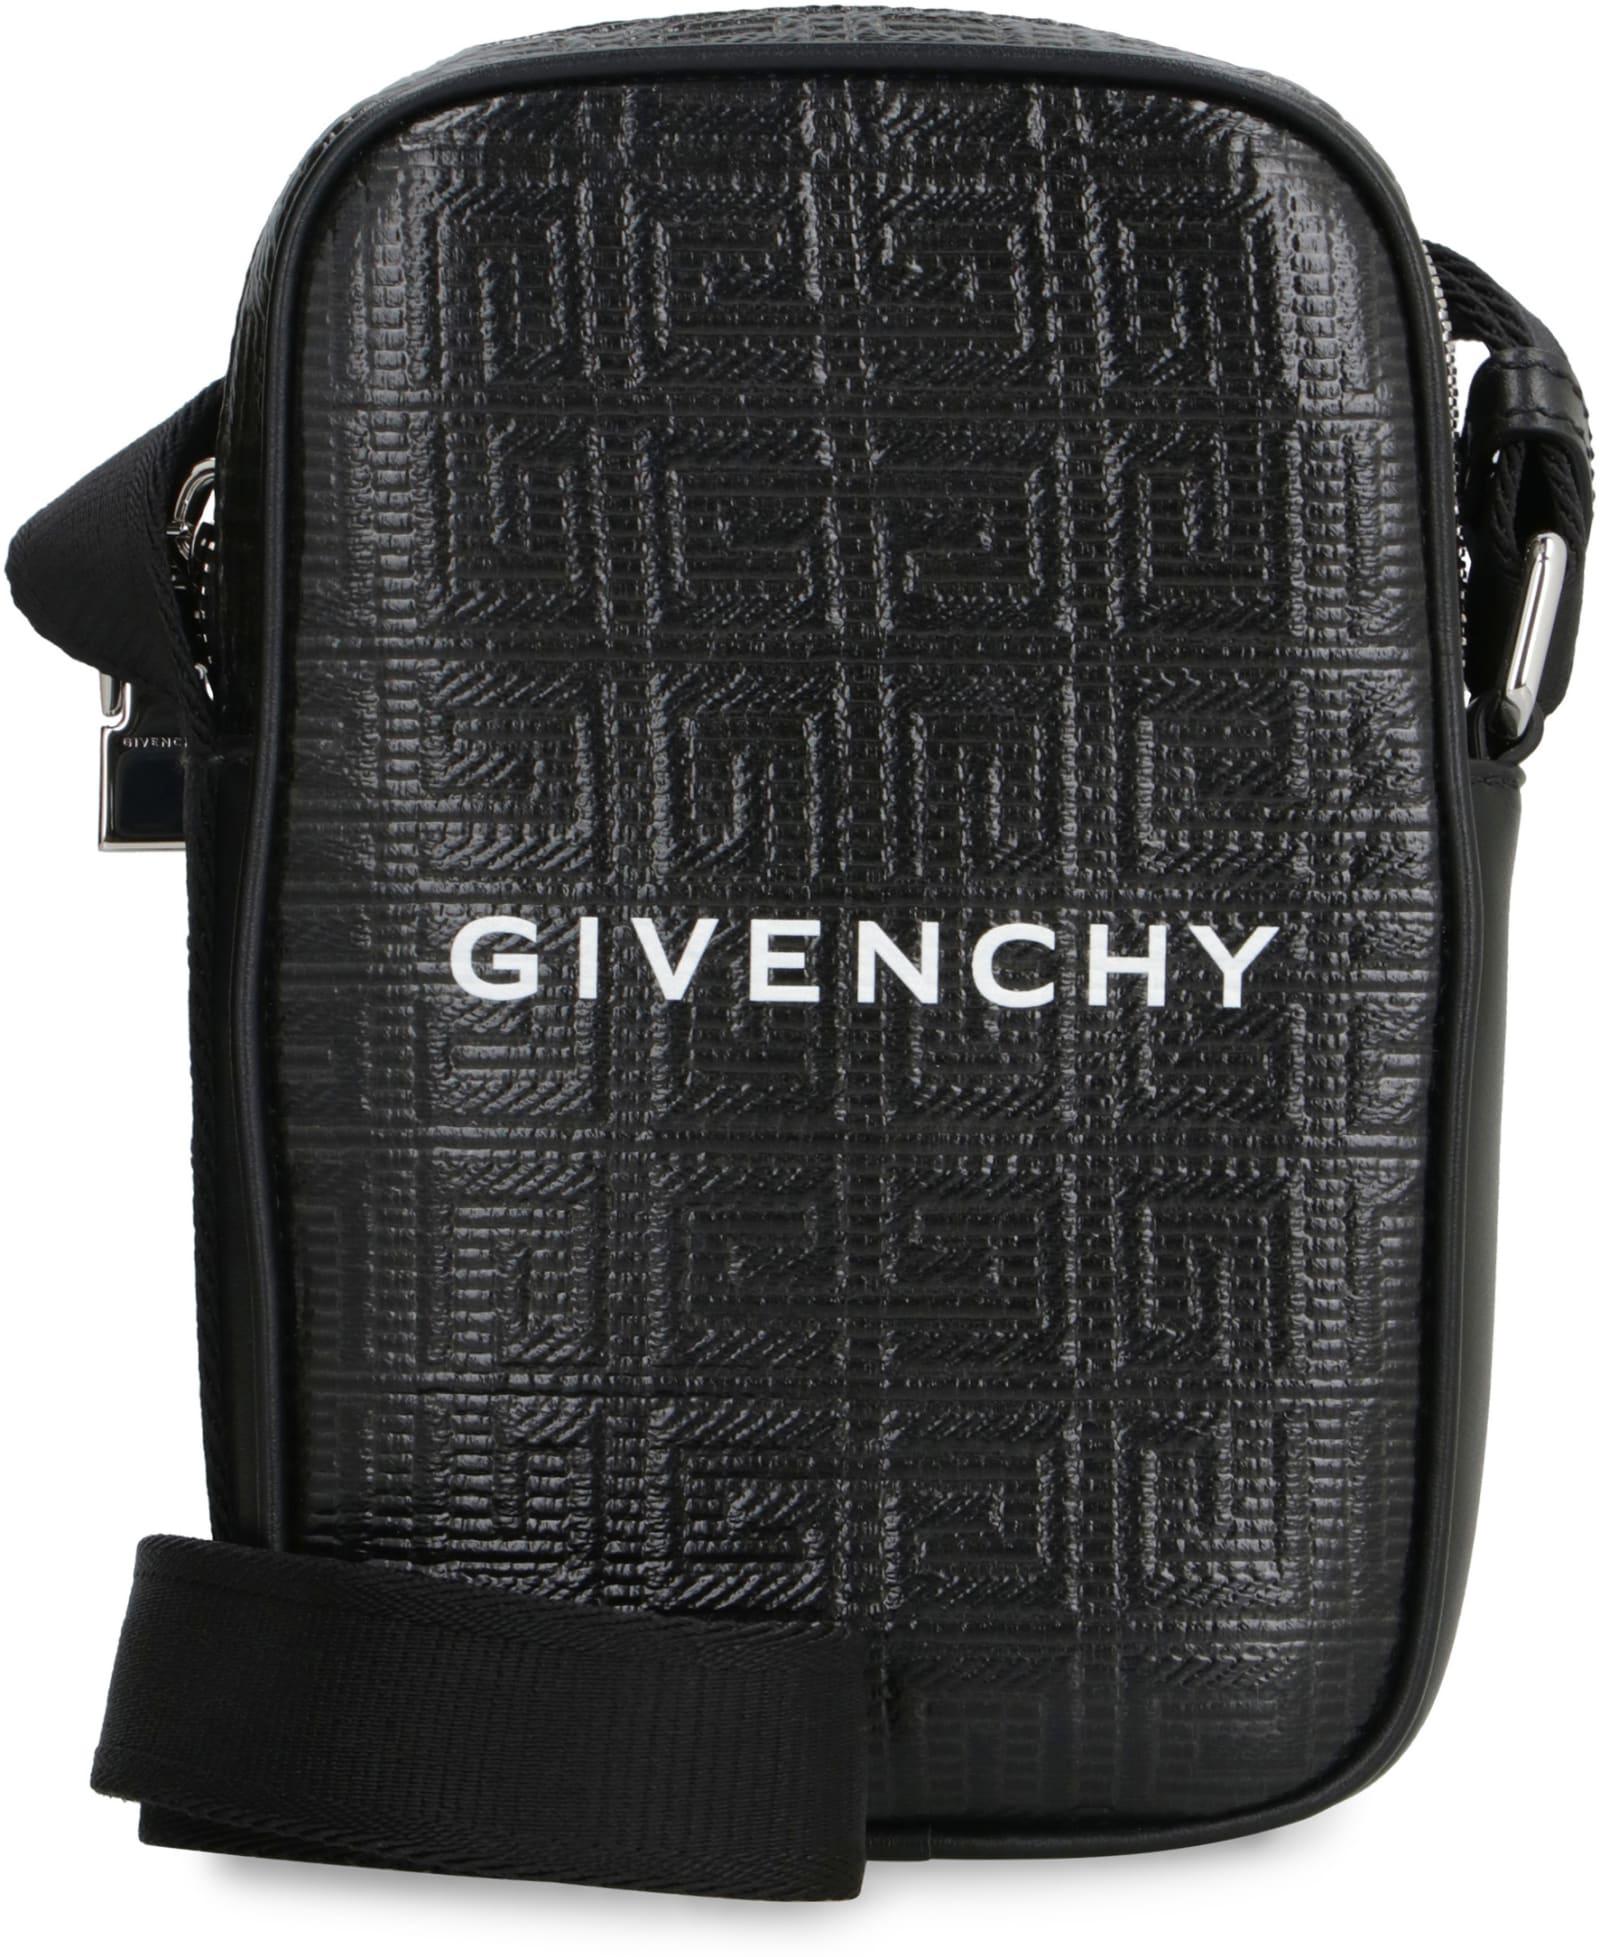 Givenchy bags for Men